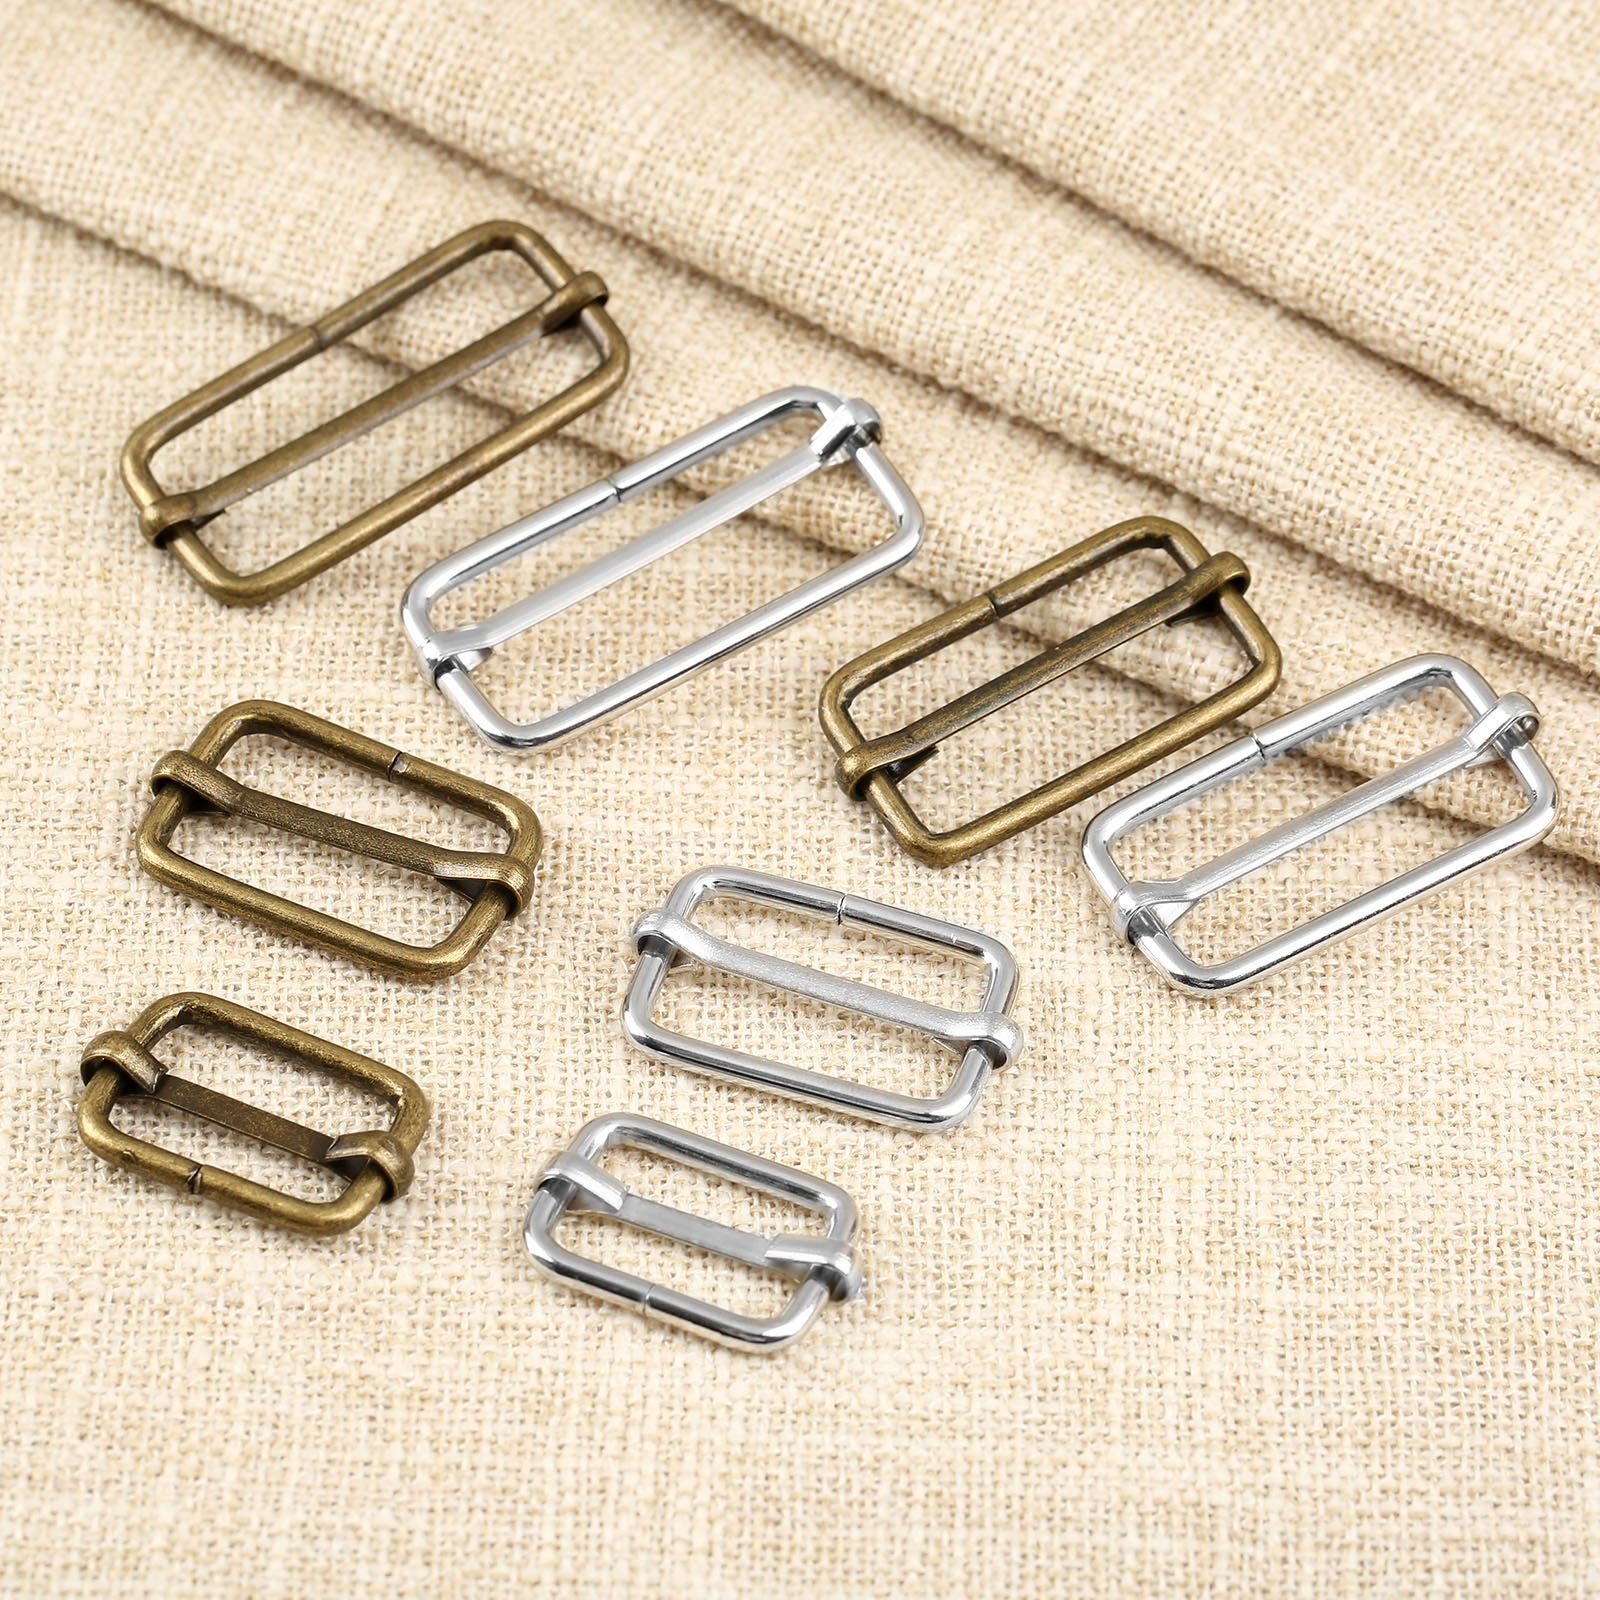 20pcs/lot Metal square ring buckles Strap Slider Adjuster for Bags Garment Leather Accessories DIY Needlework